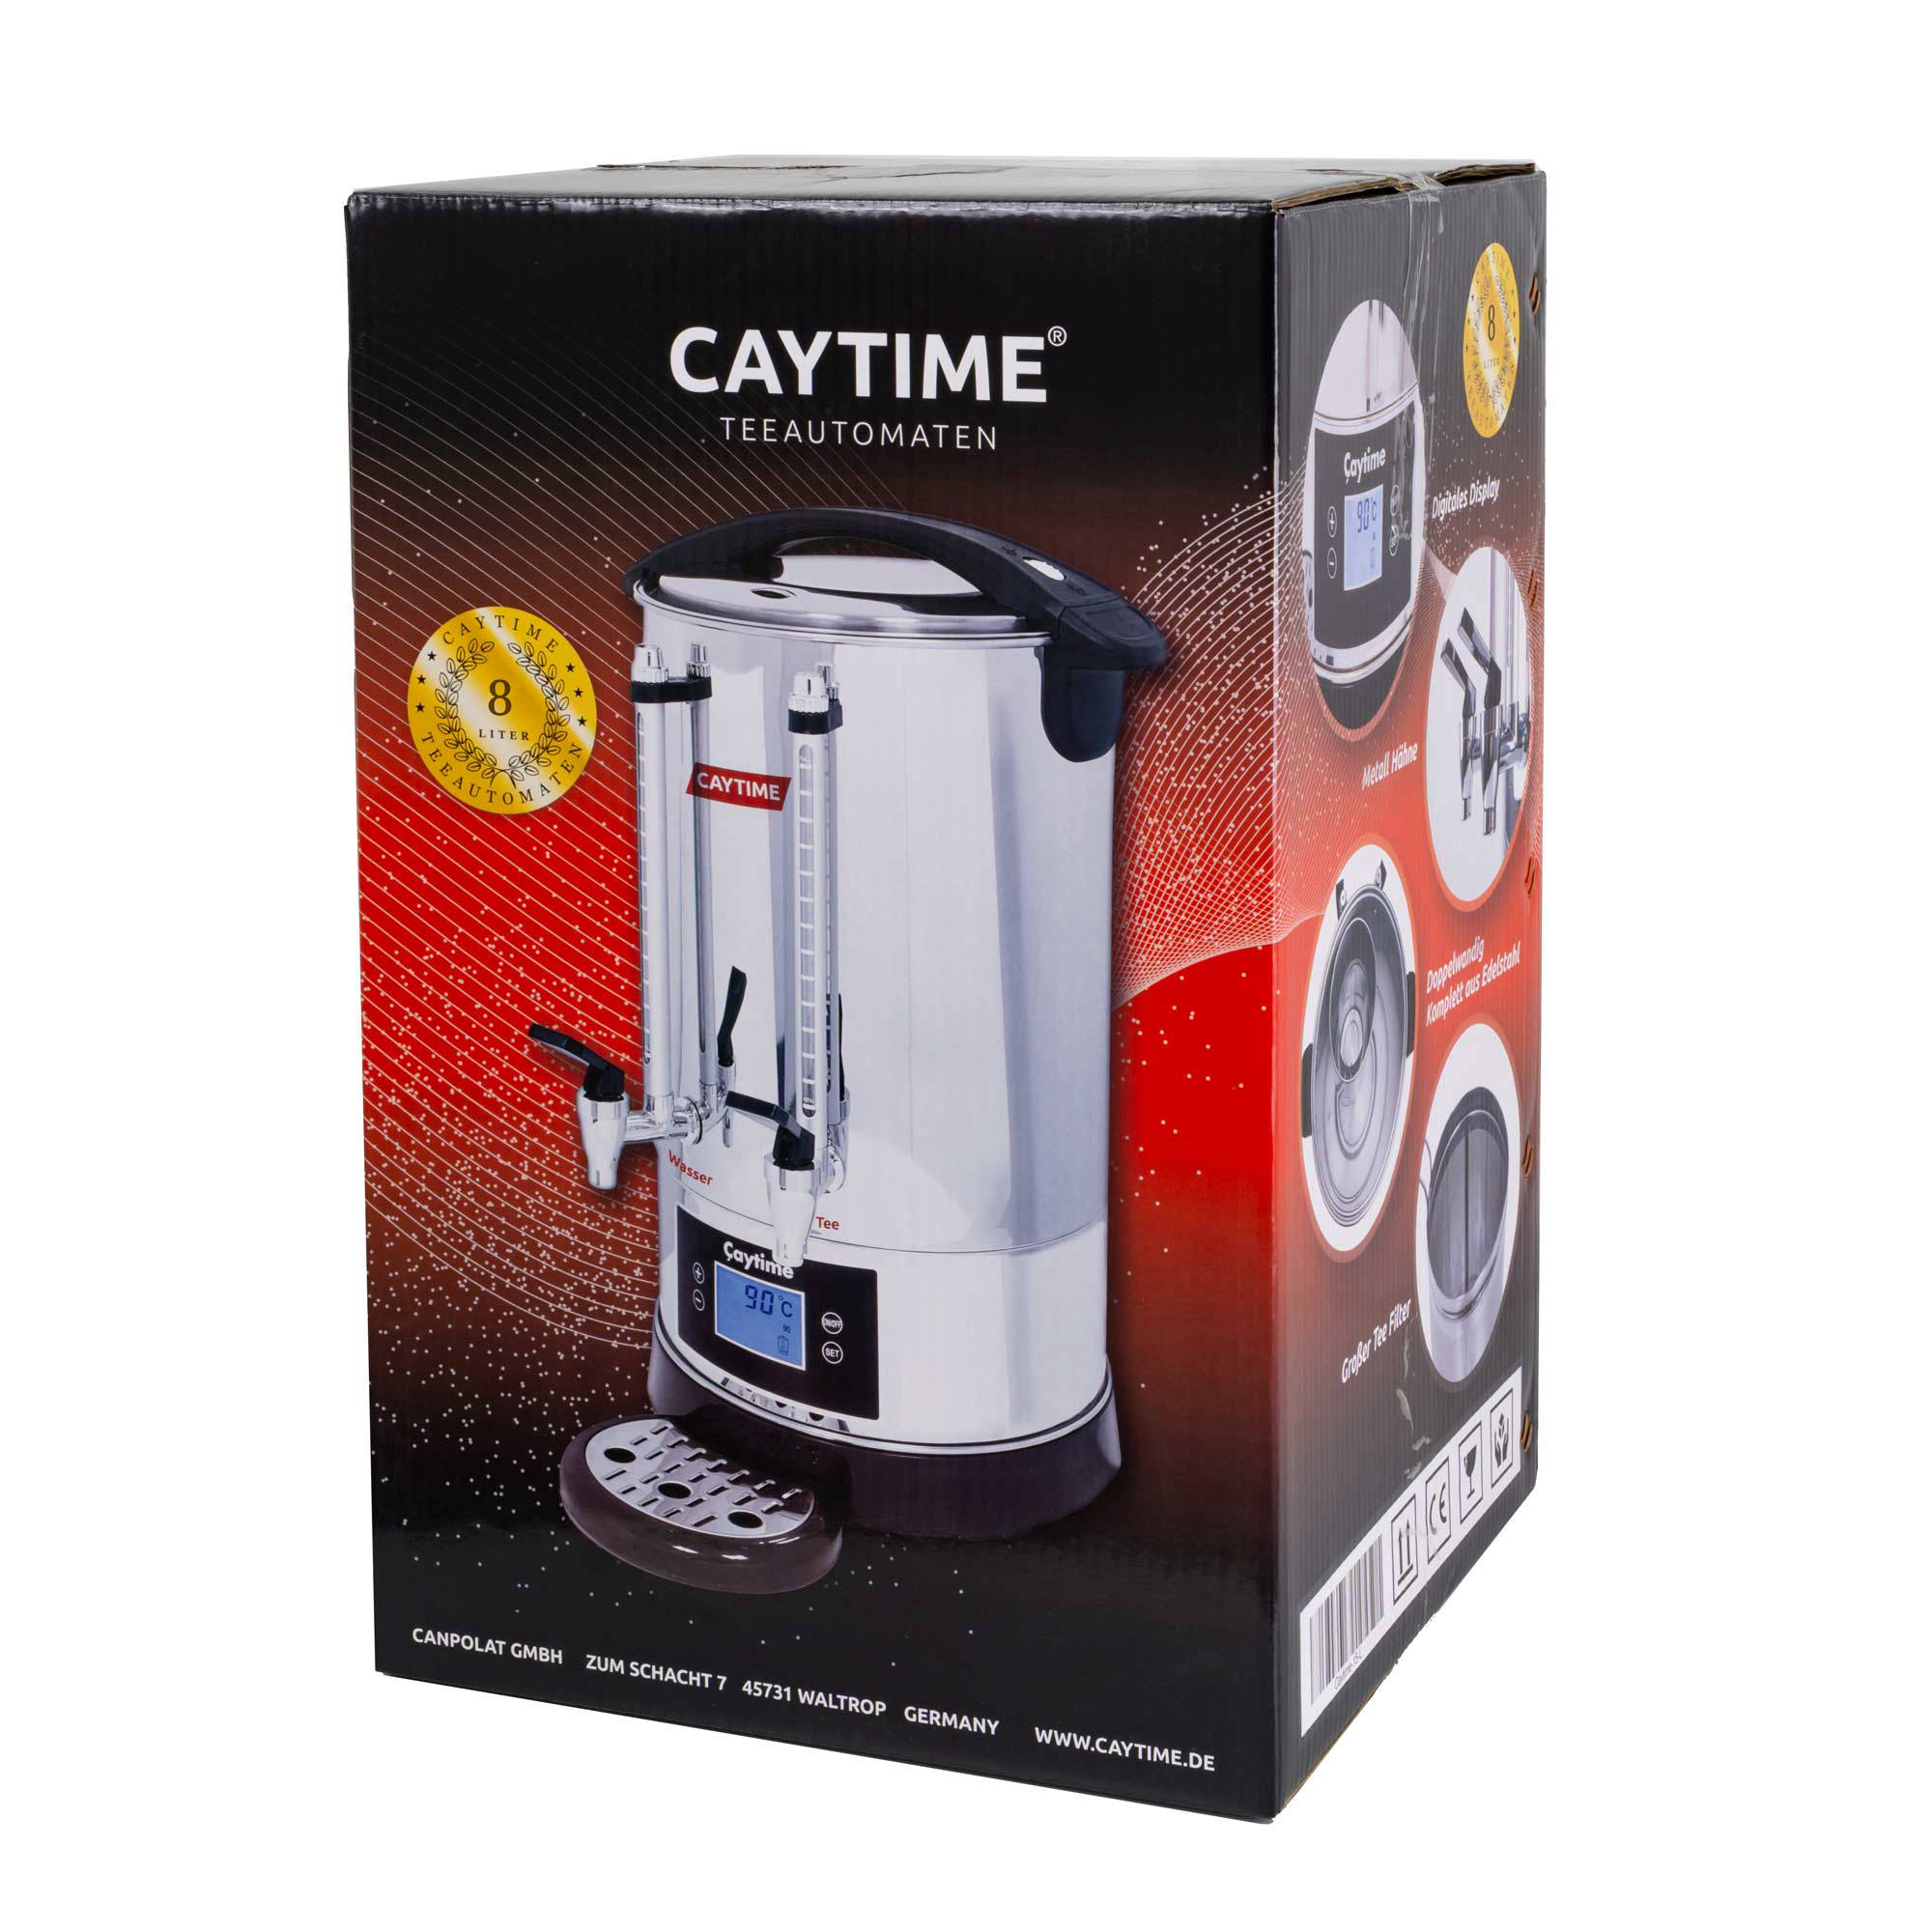 Caytime Verpackung Teeautomat